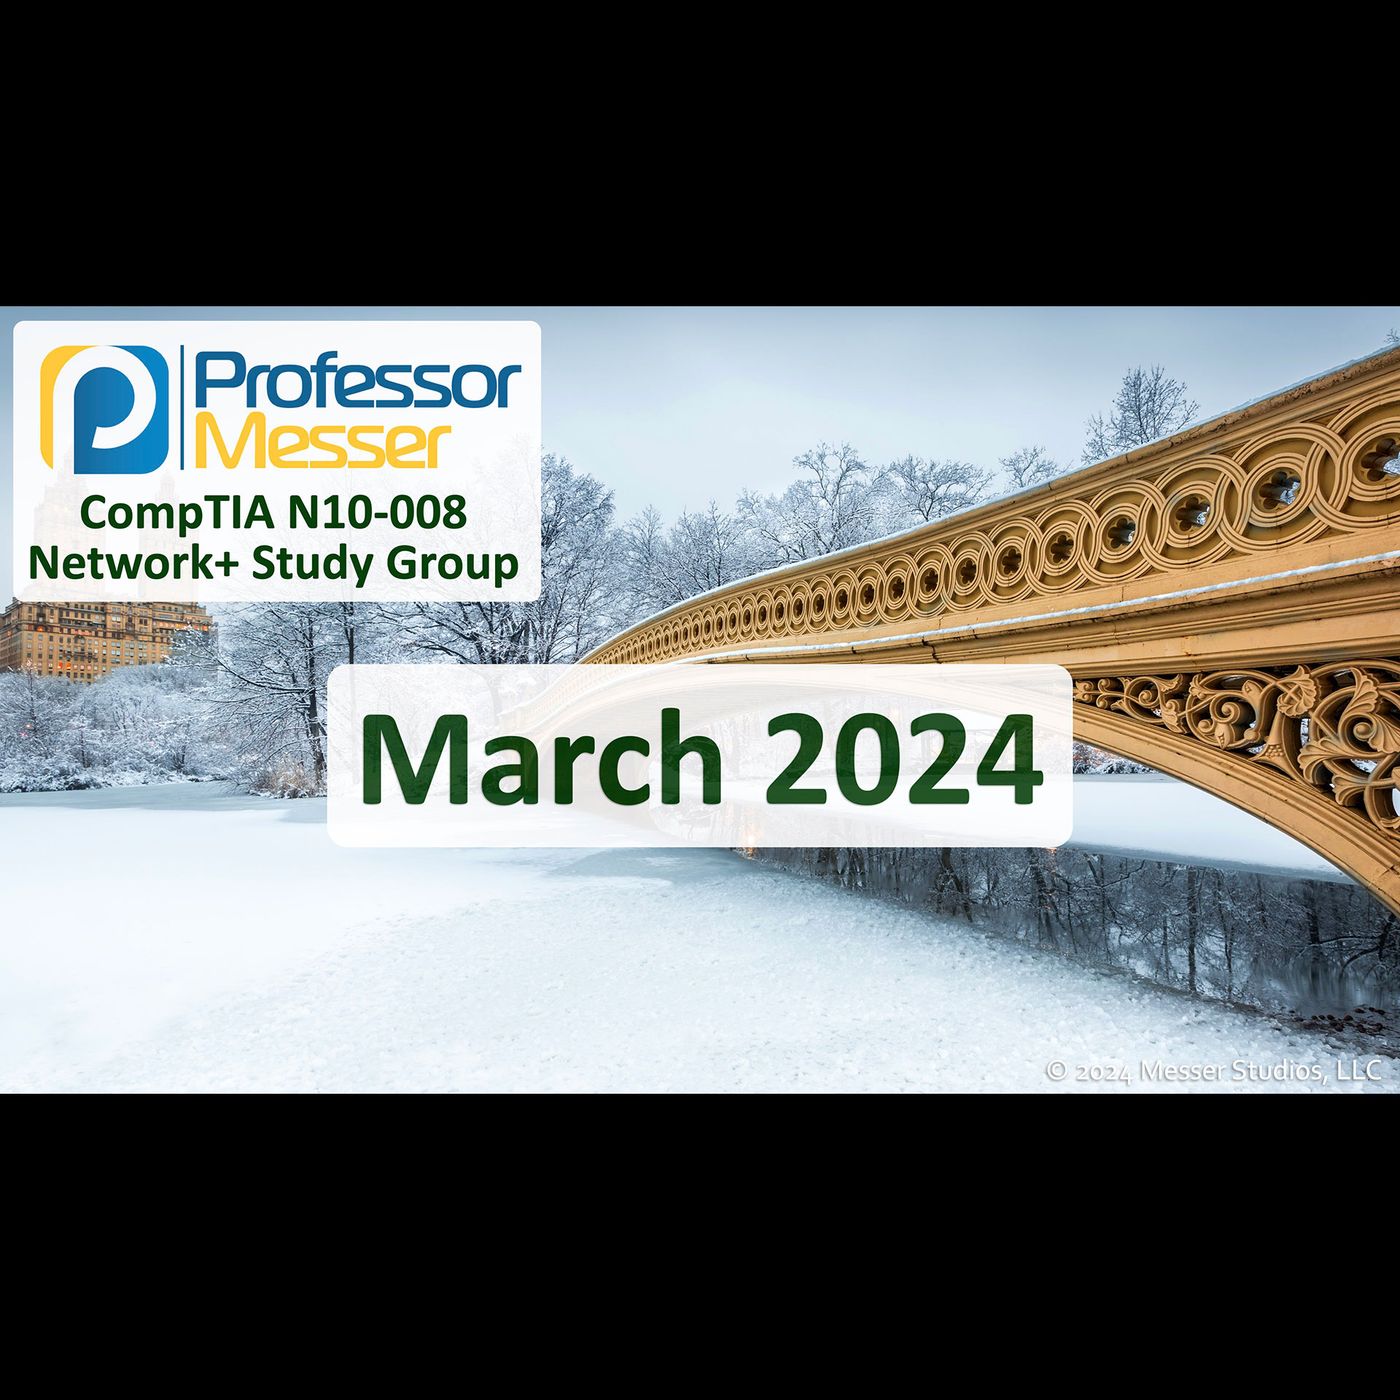 Professor Messer’s N10-008 Network+ Study Group - March 2024